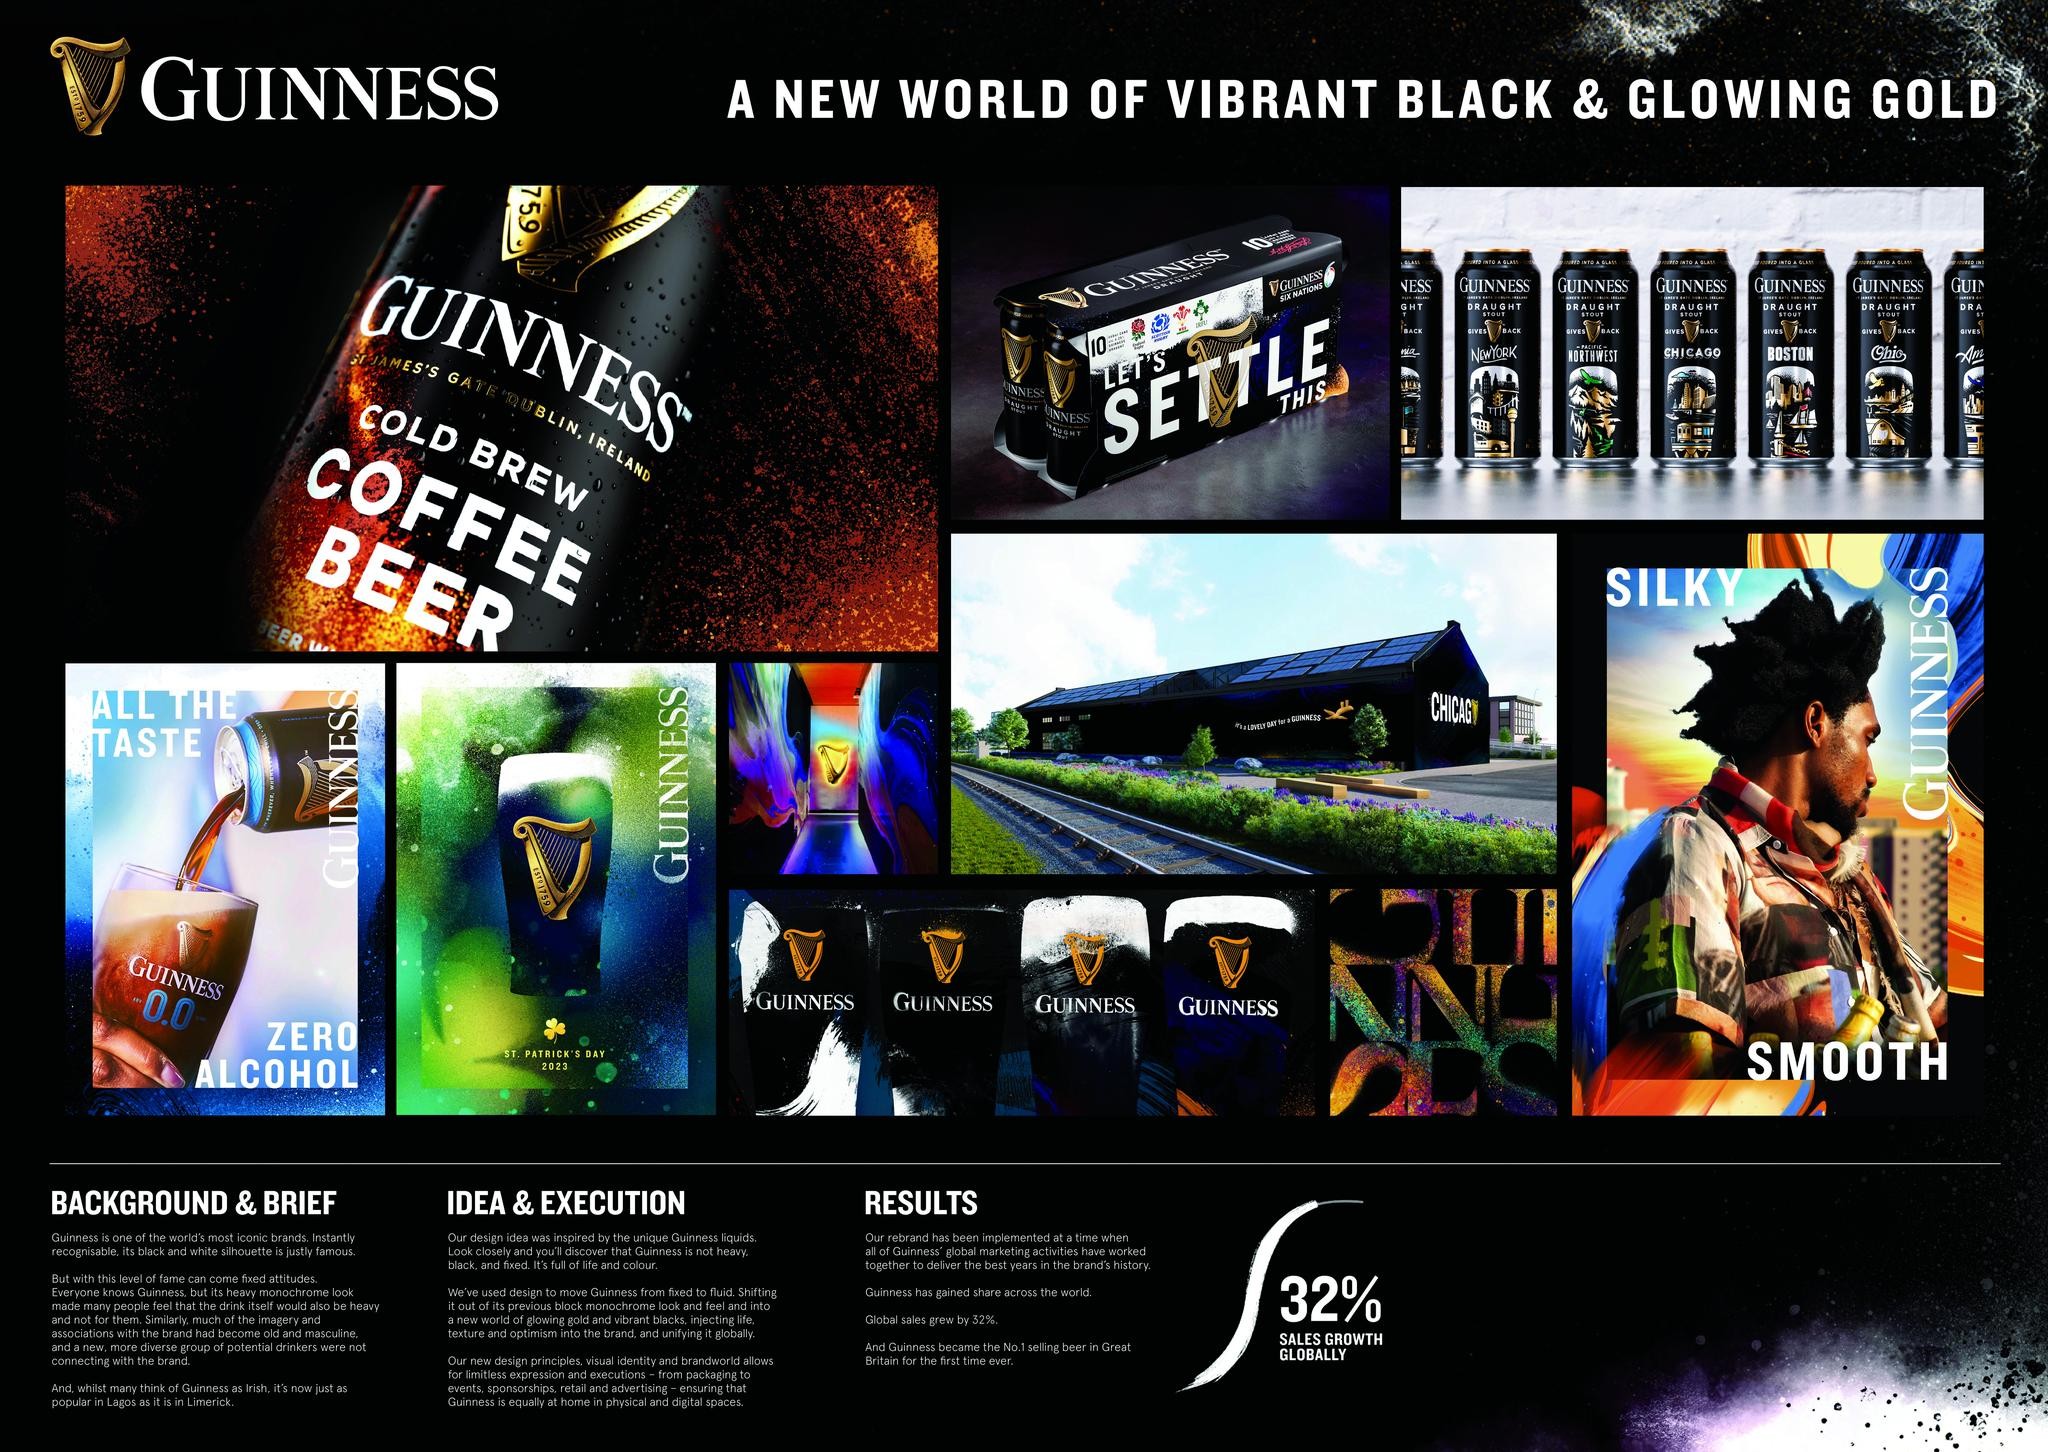 Welcome to the World of Guinness